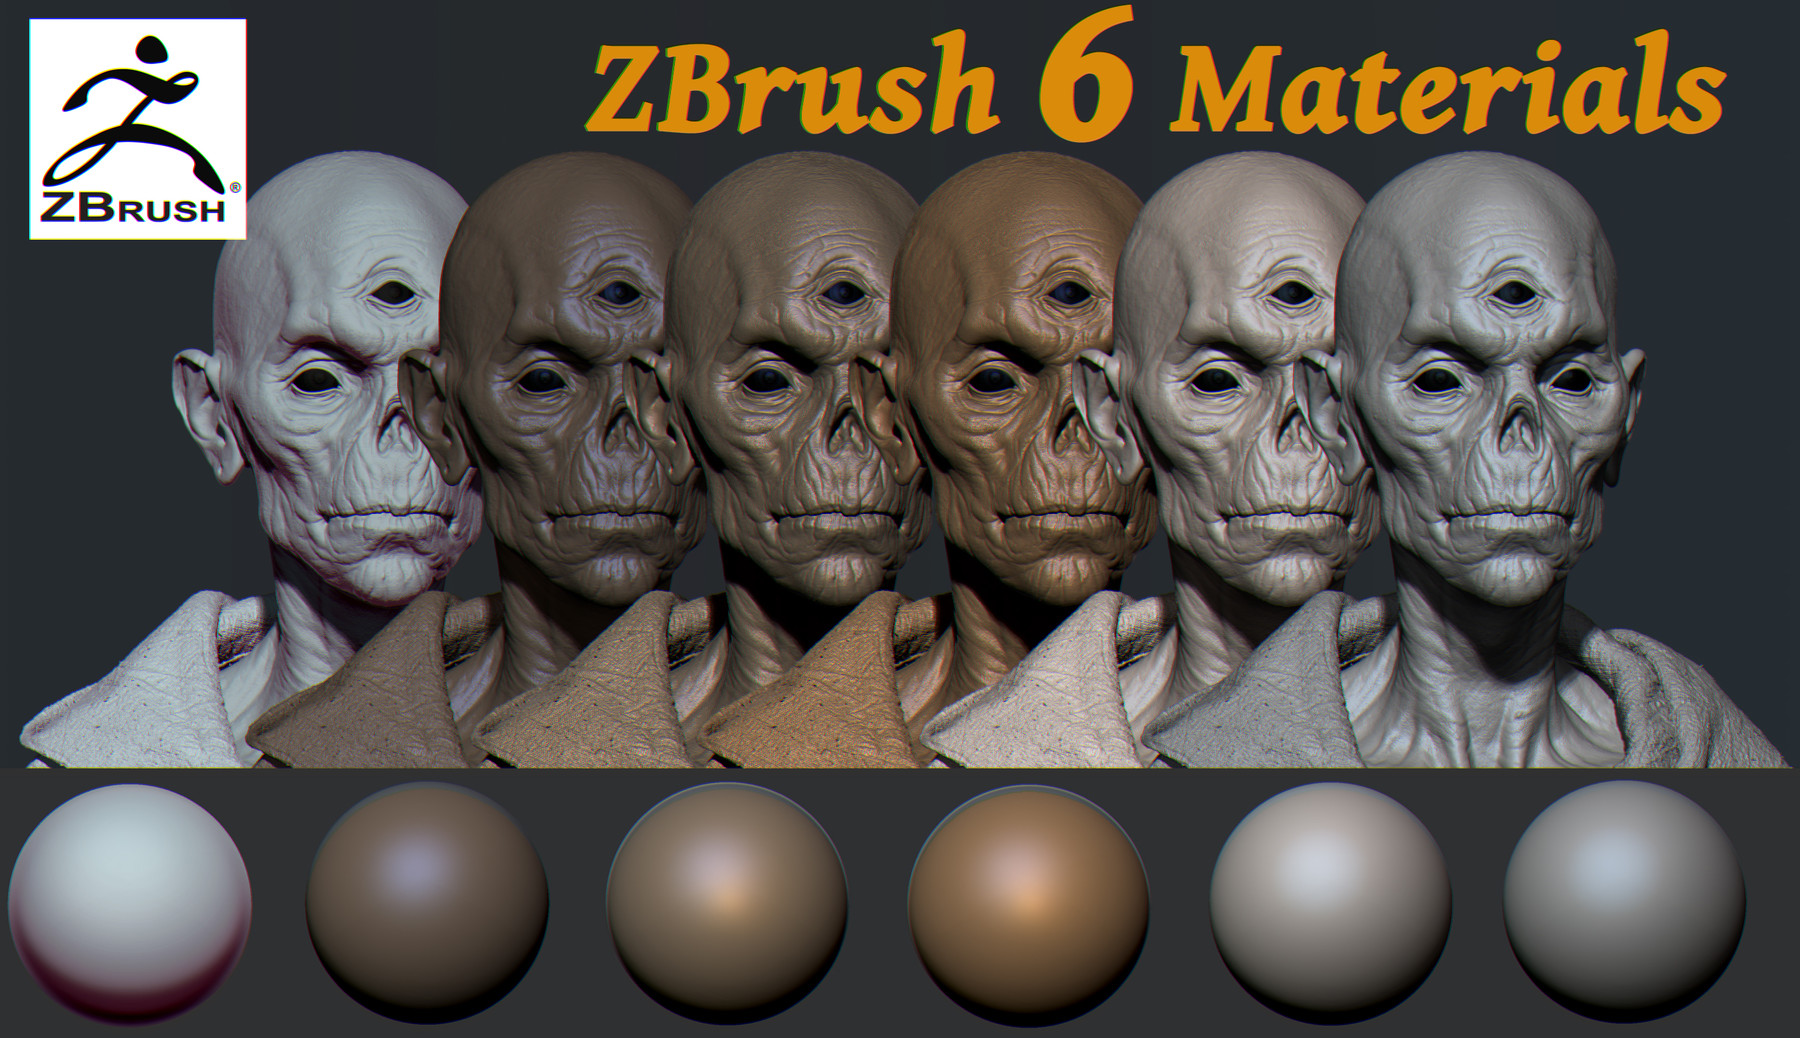 load zbrush material